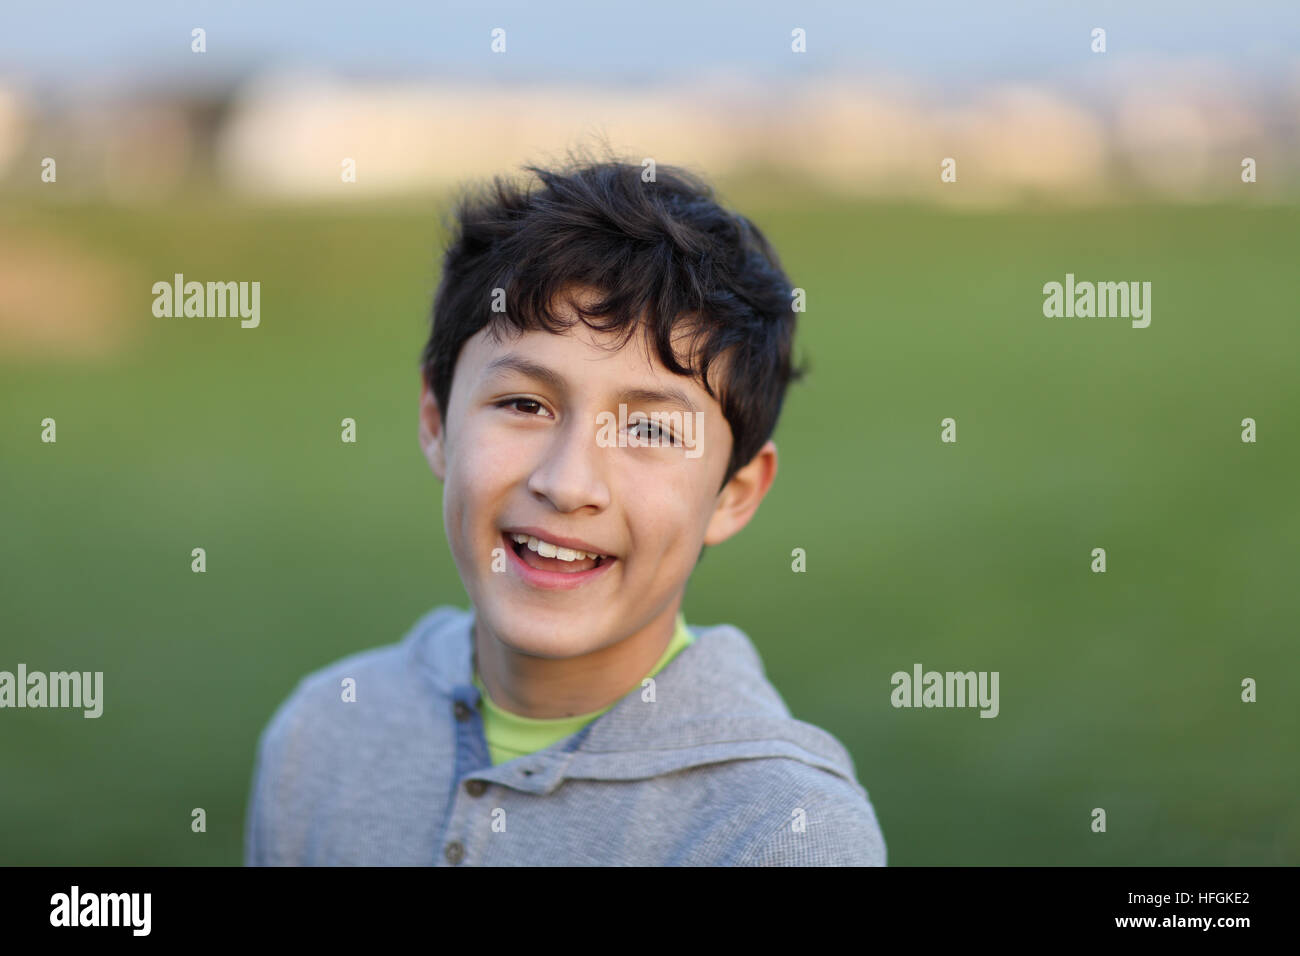 Young teen boy in the playing field during the golden hour - shallow depth of field Stock Photo